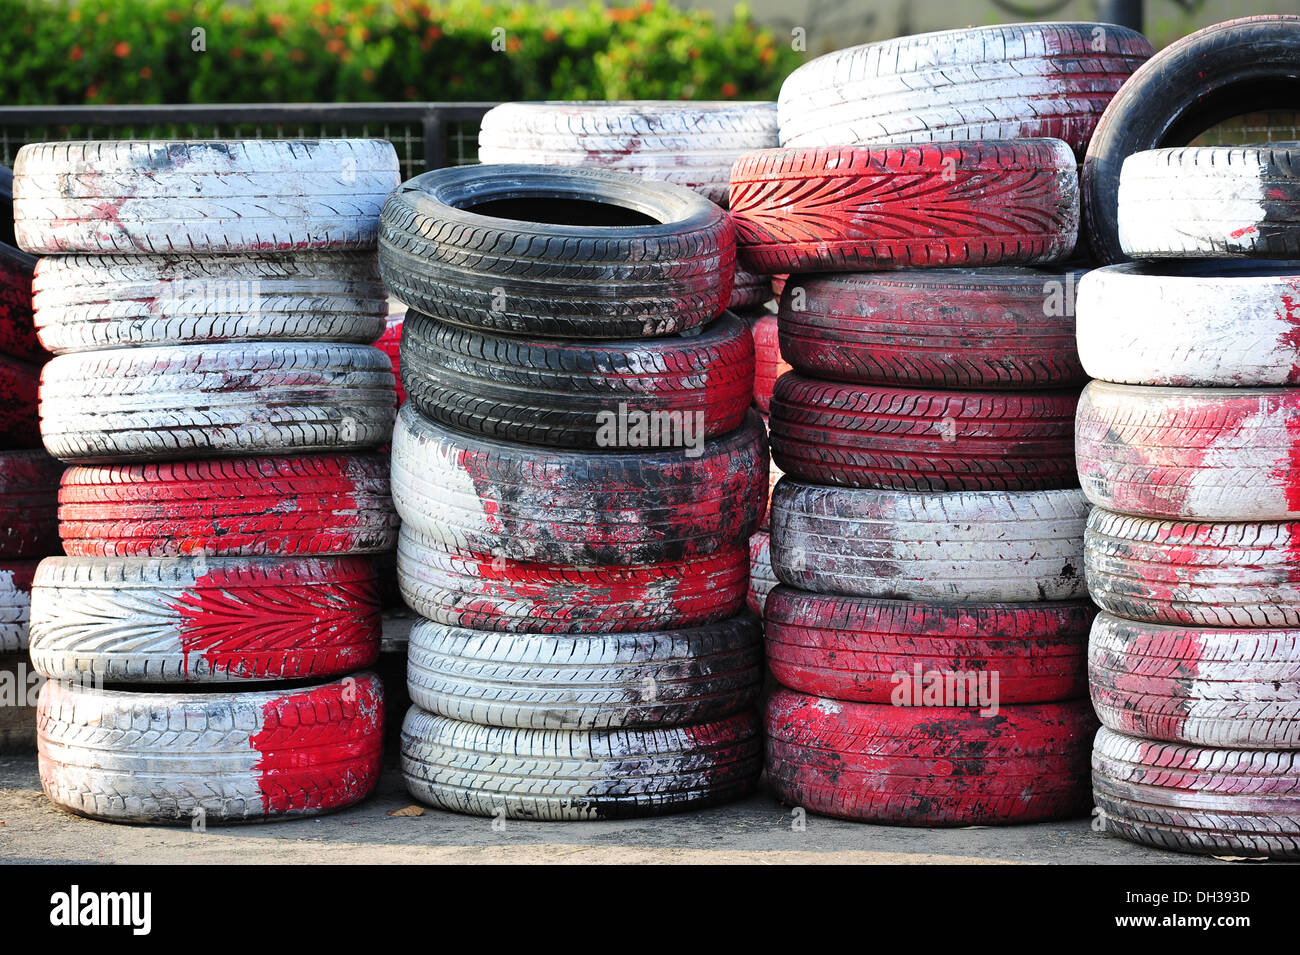 Old tires Stock Photo